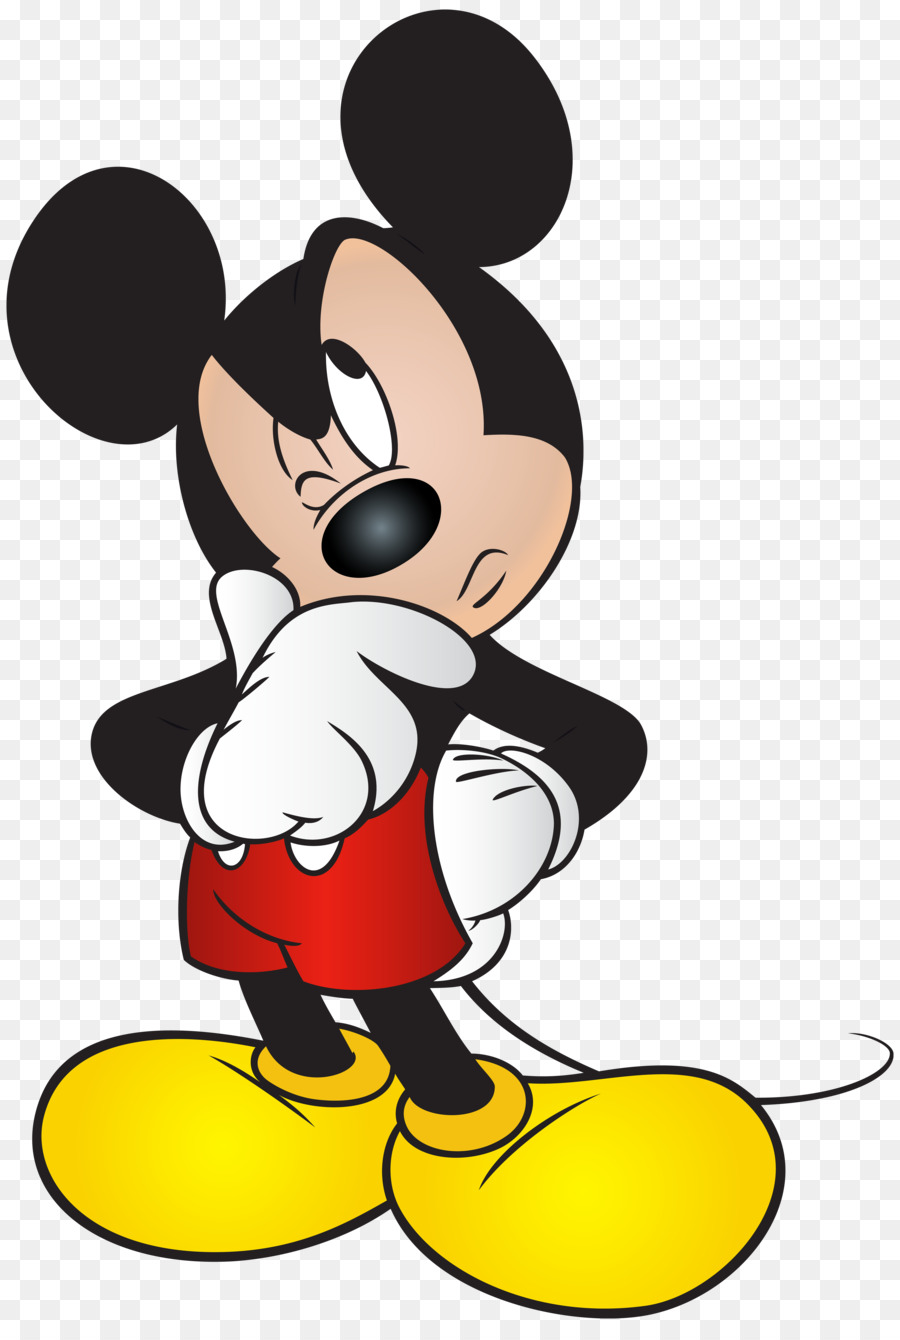 Mickey Mouse Minnie Mouse The Walt Disney Company Coloring book Clip art - mickey png download - 5423*8000 - Free Transparent Mickey Mouse png Download.